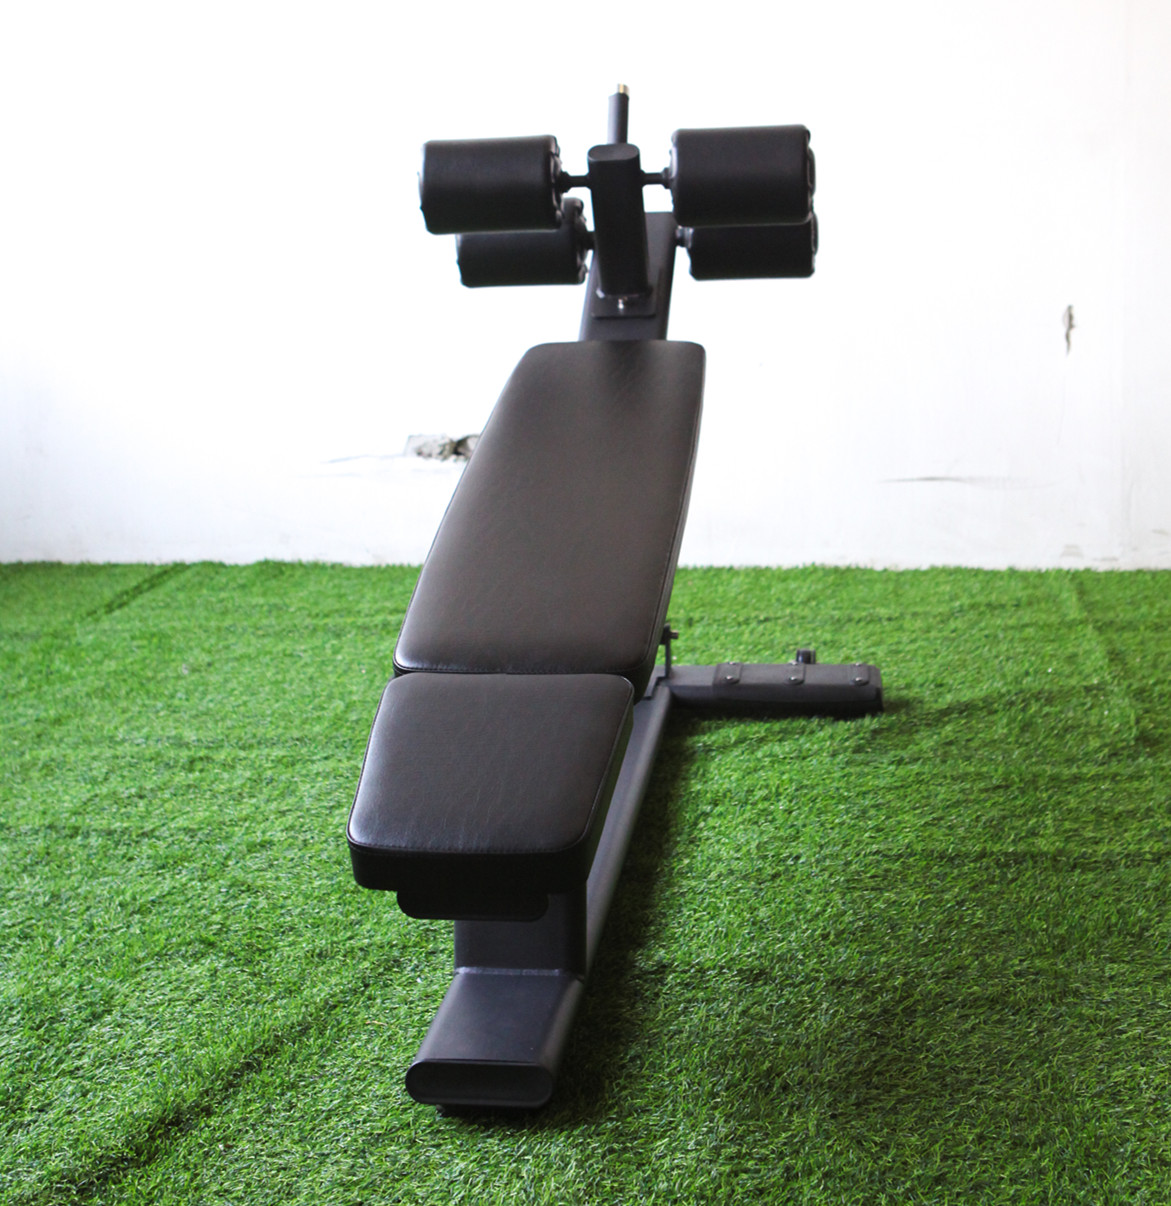 Exercise Bench Type Adjustable Bench/Abdominal Crunch Bench Sports Equipment